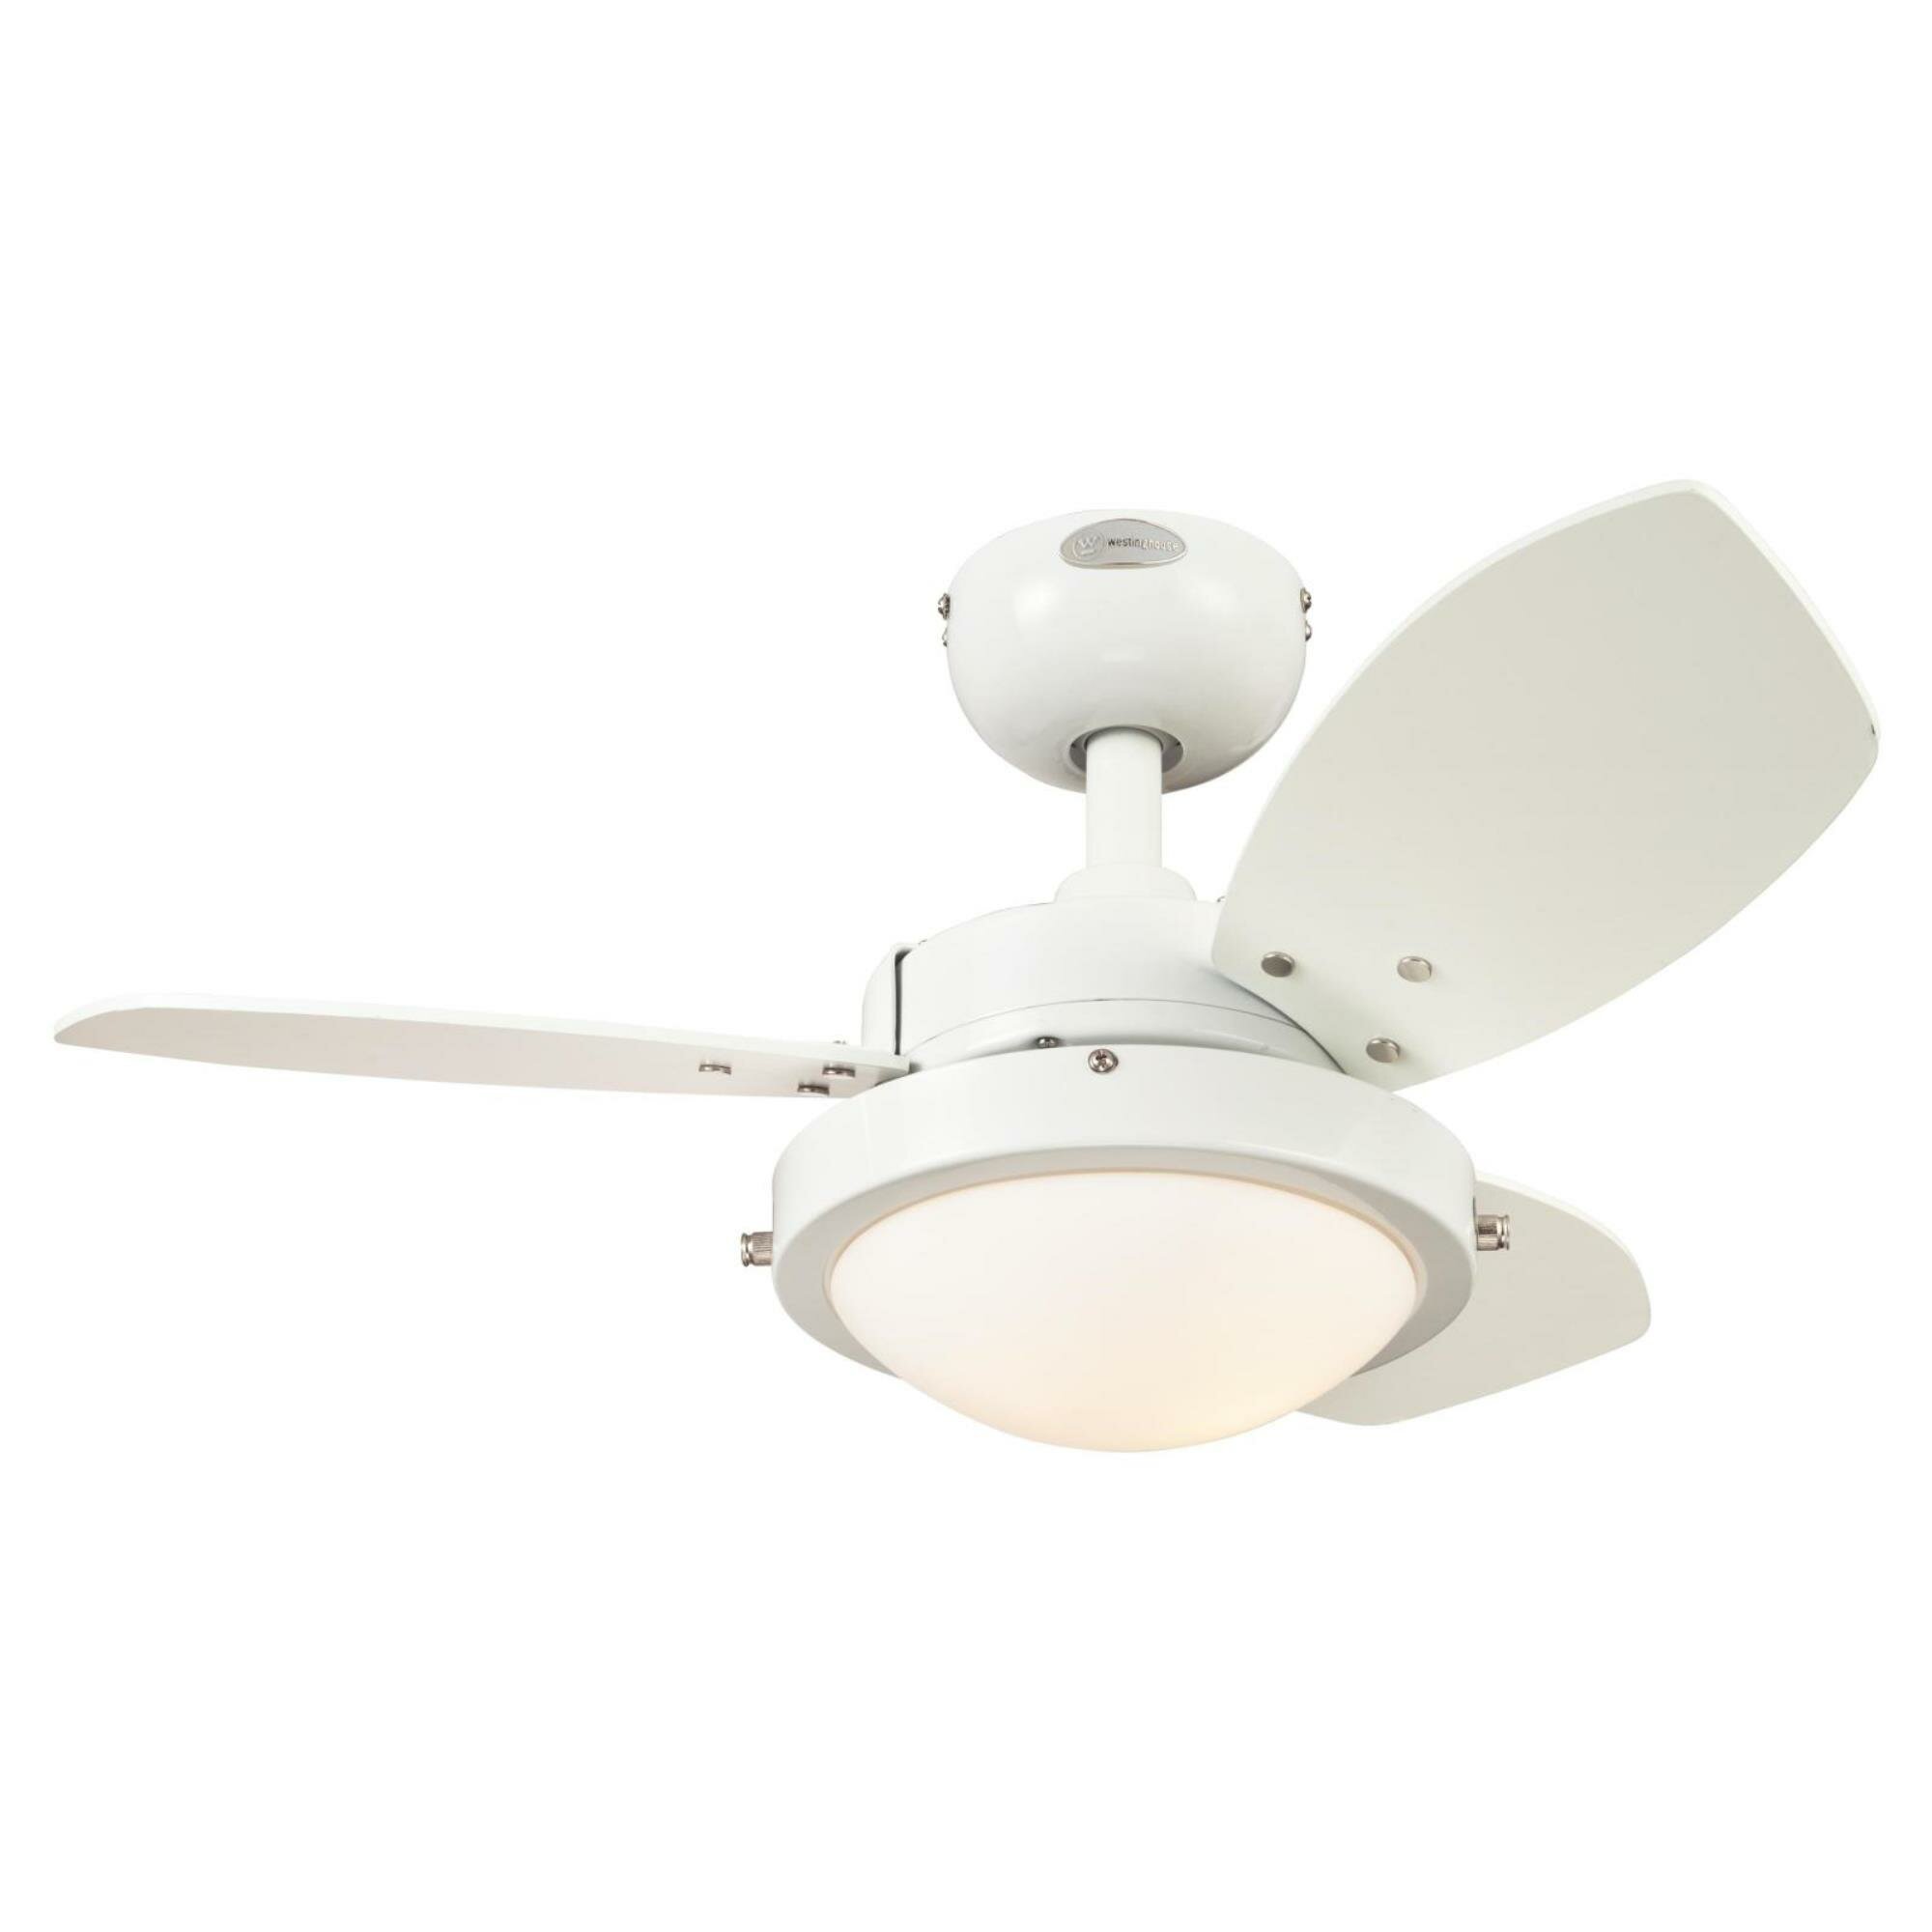 30 Chenery 3 Blade Ceiling Fan Light Kit Included Reviews